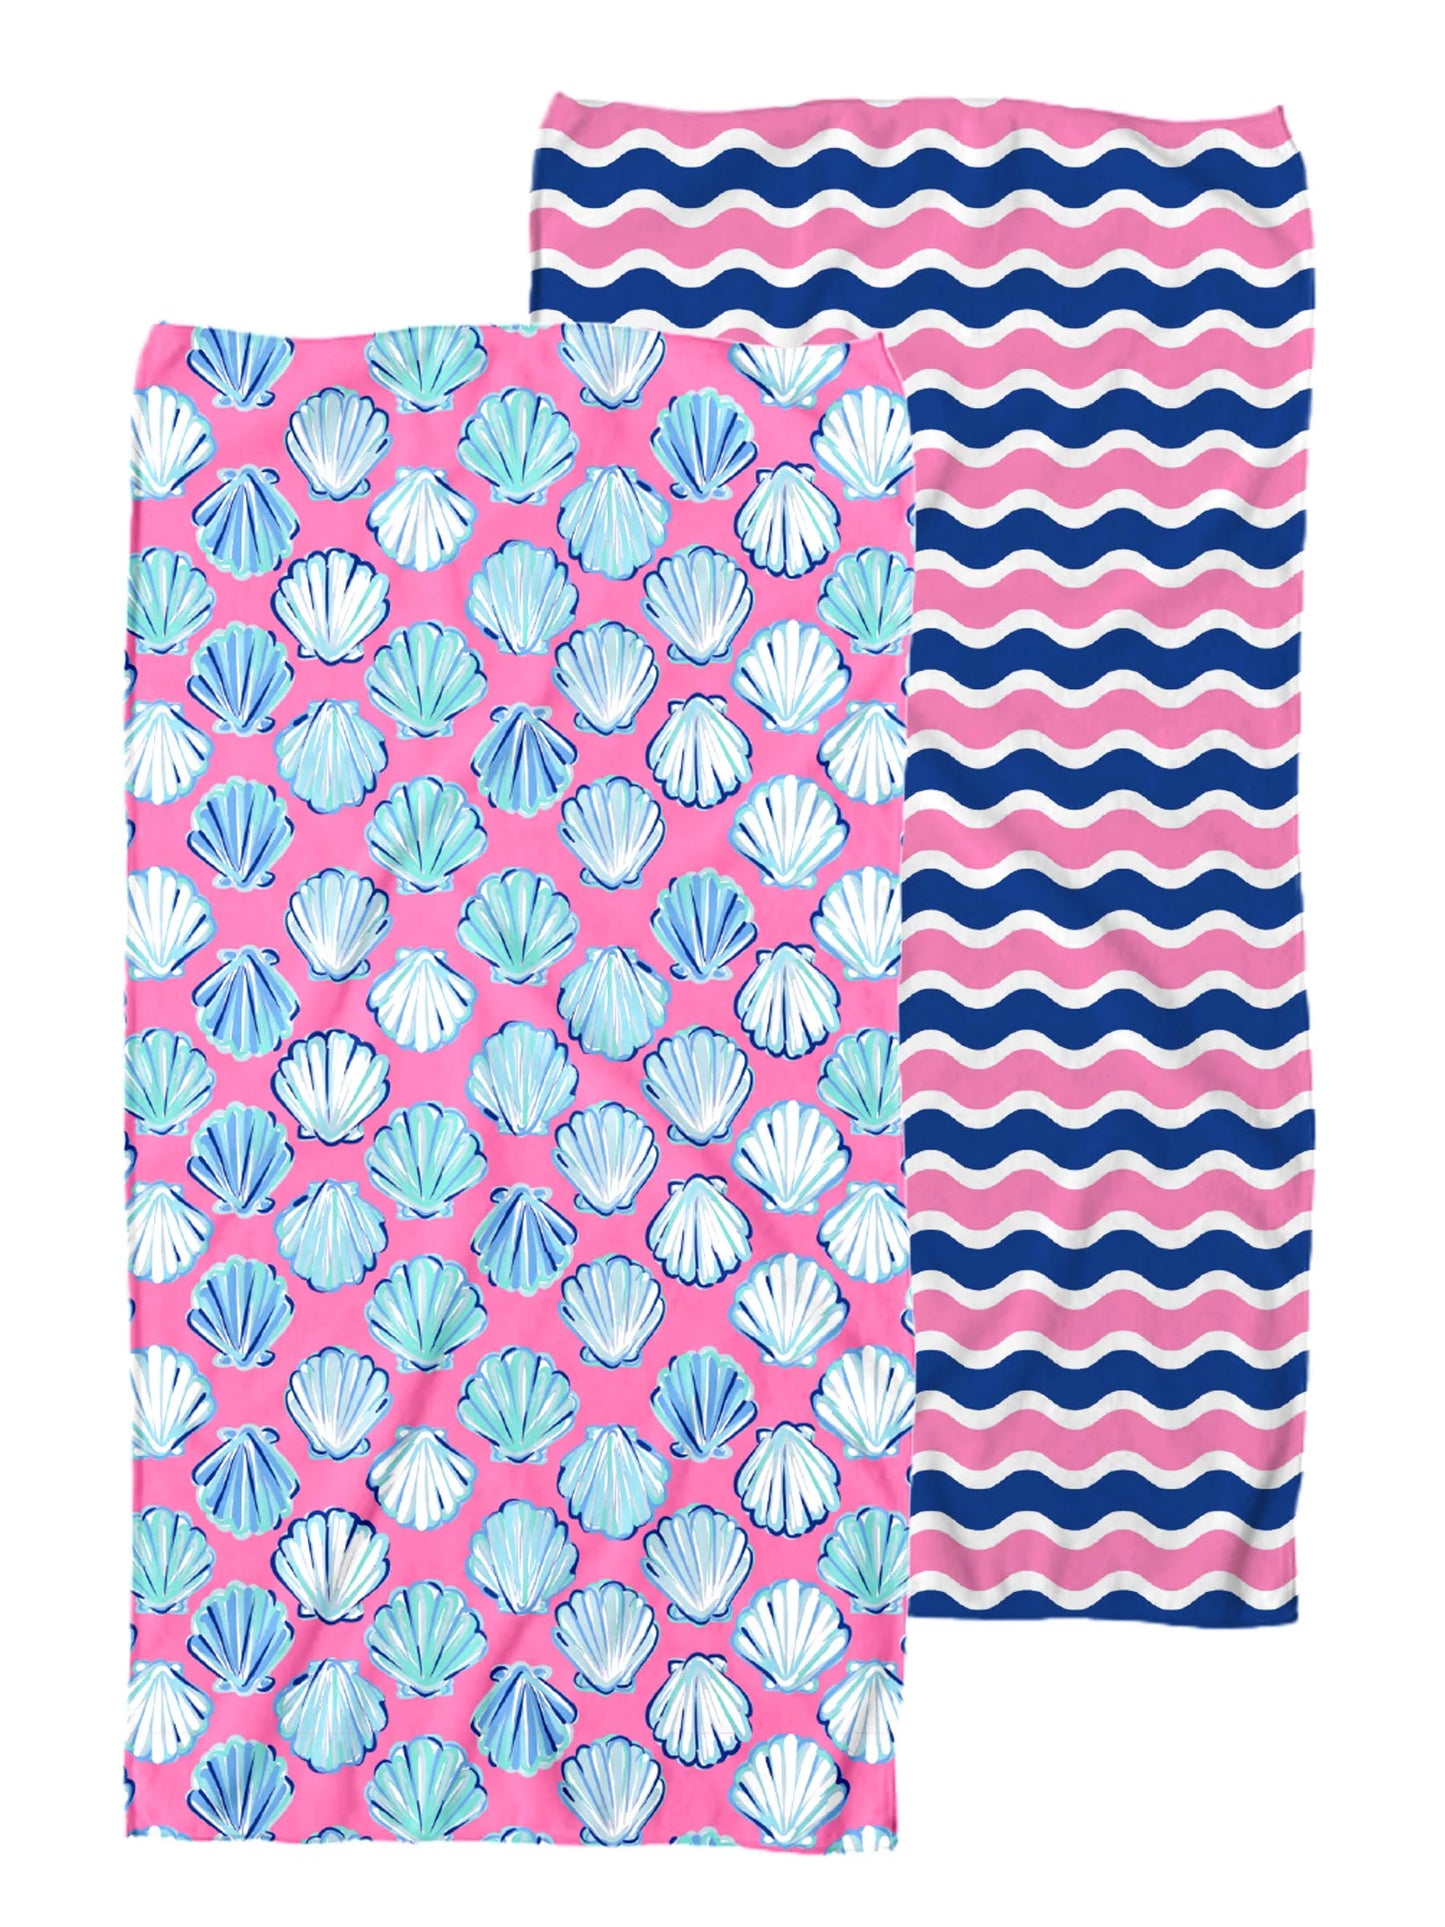 two sided towel. one side is a pink base with blue seashells and the other side is navy, white, and pink waved lines. 